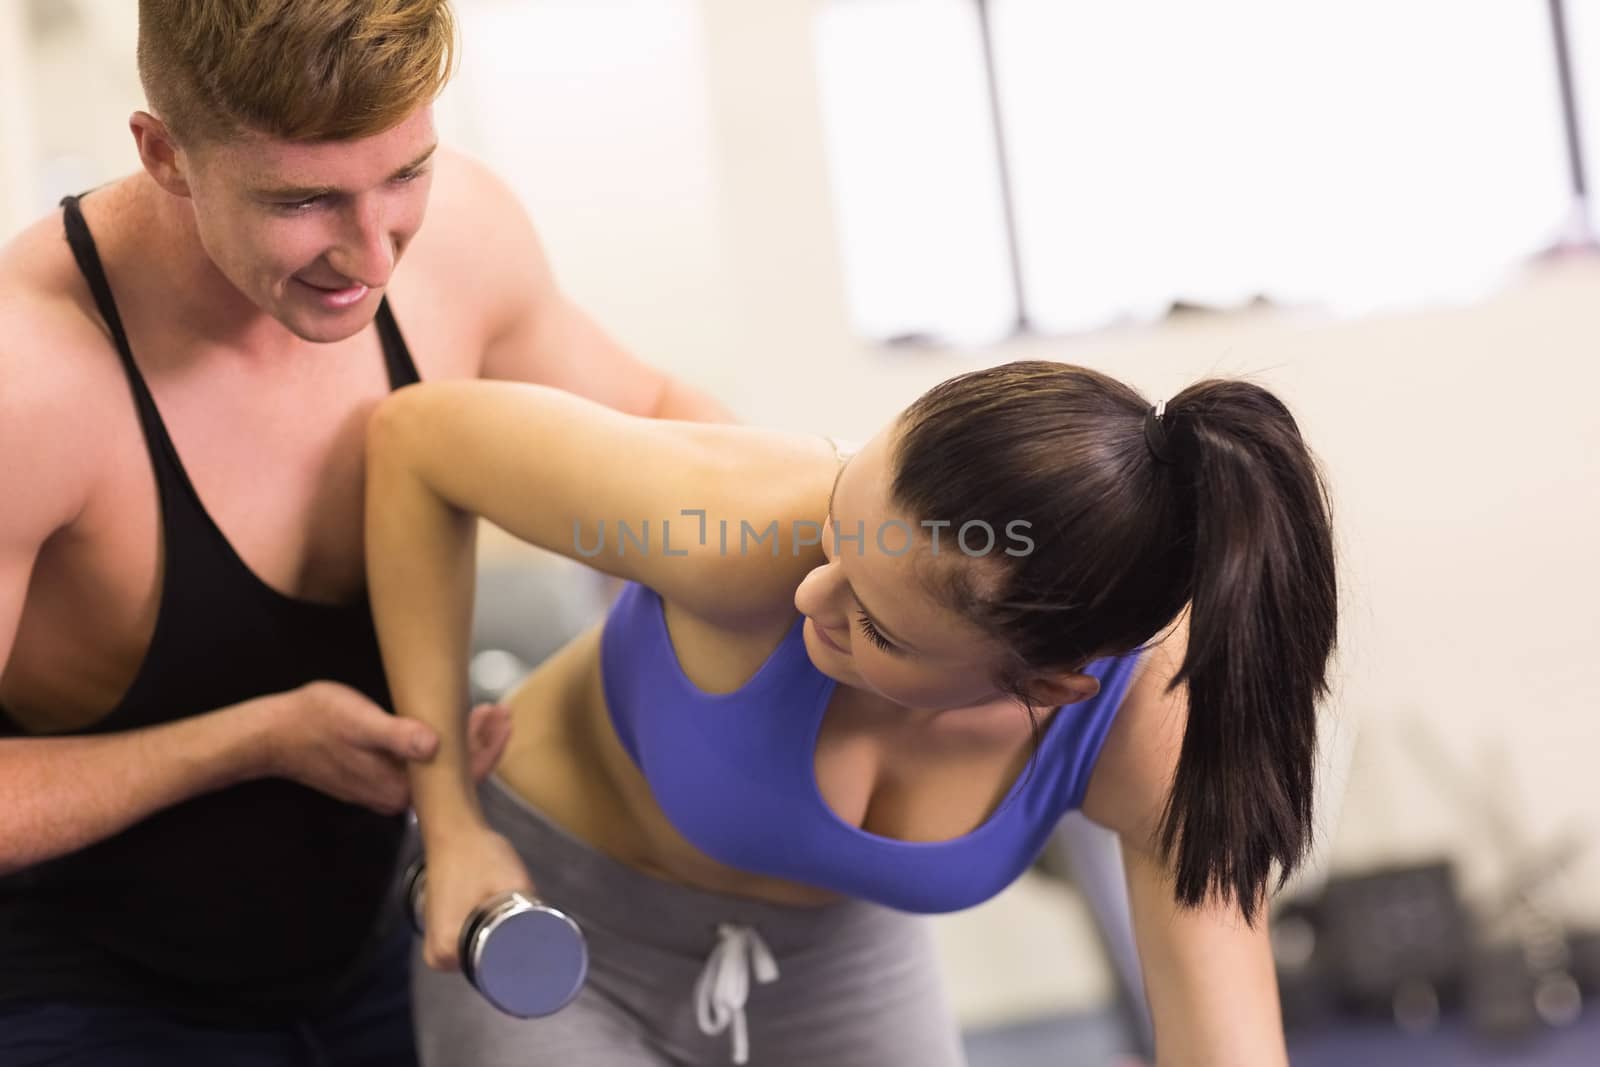 Male trainer helping woman with dumbbell in the gym by Wavebreakmedia